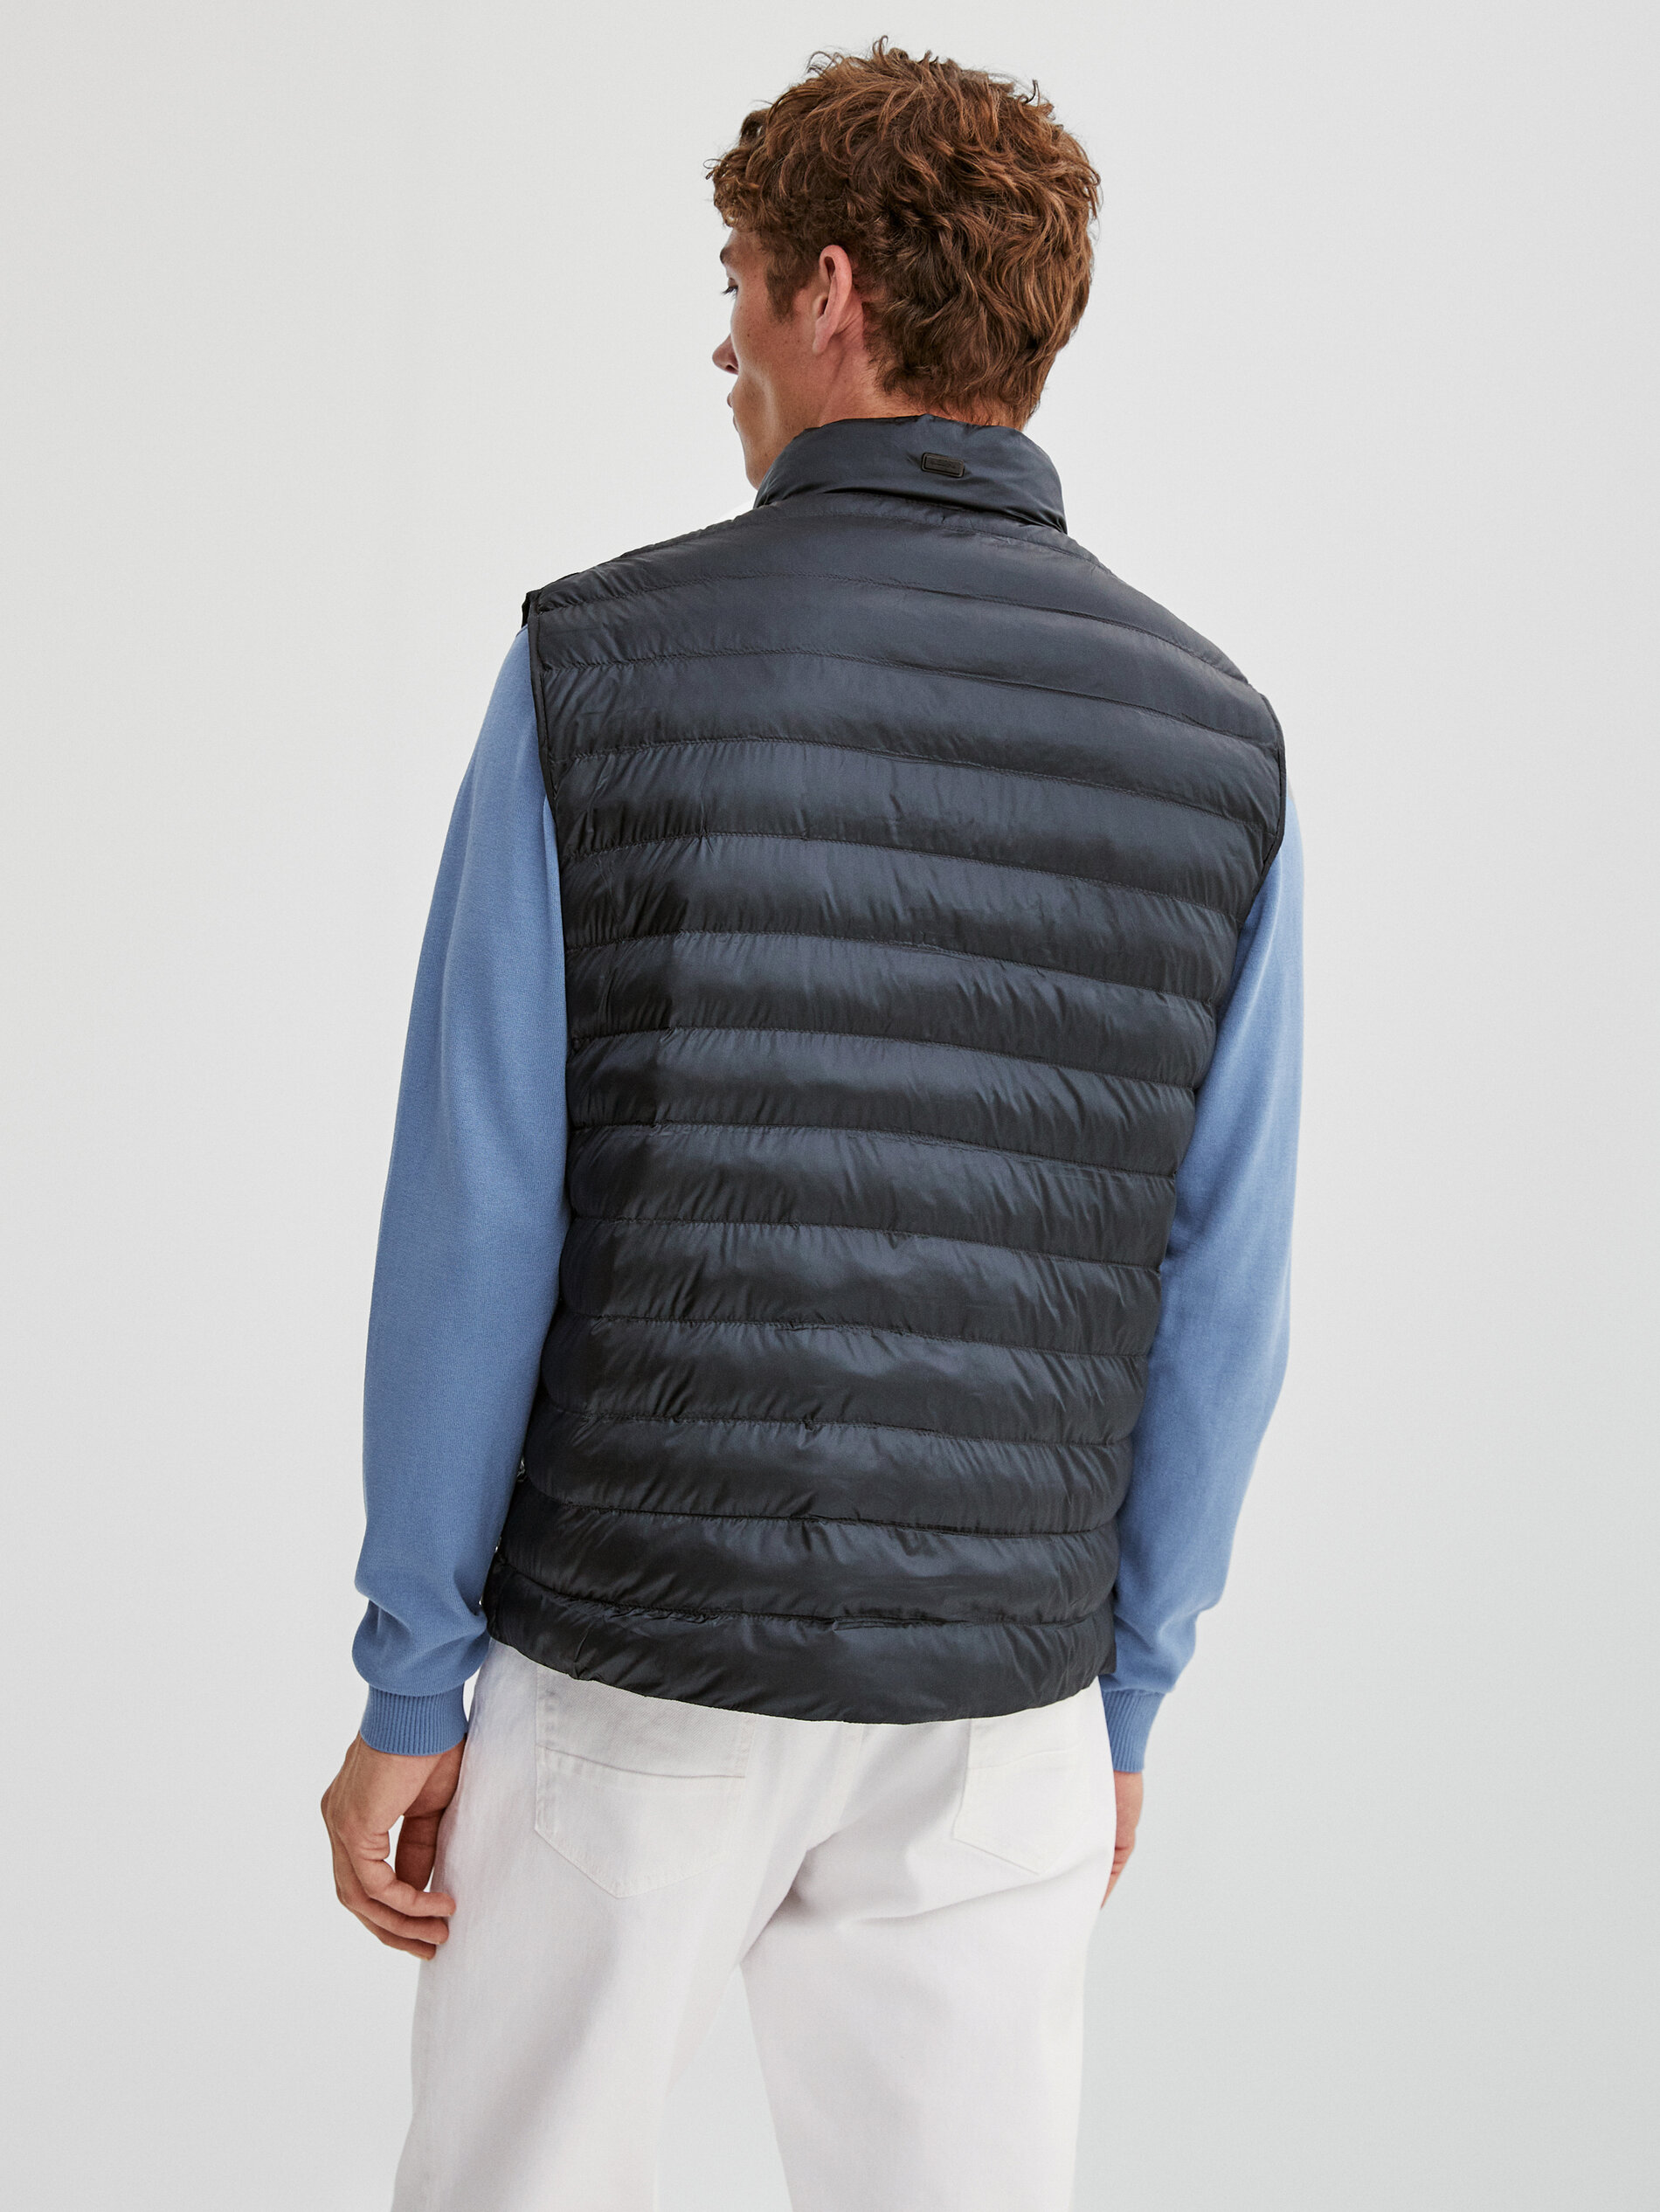 Massimo Dutti Lightweight Down Quilted Vest - Big Apple Buddy